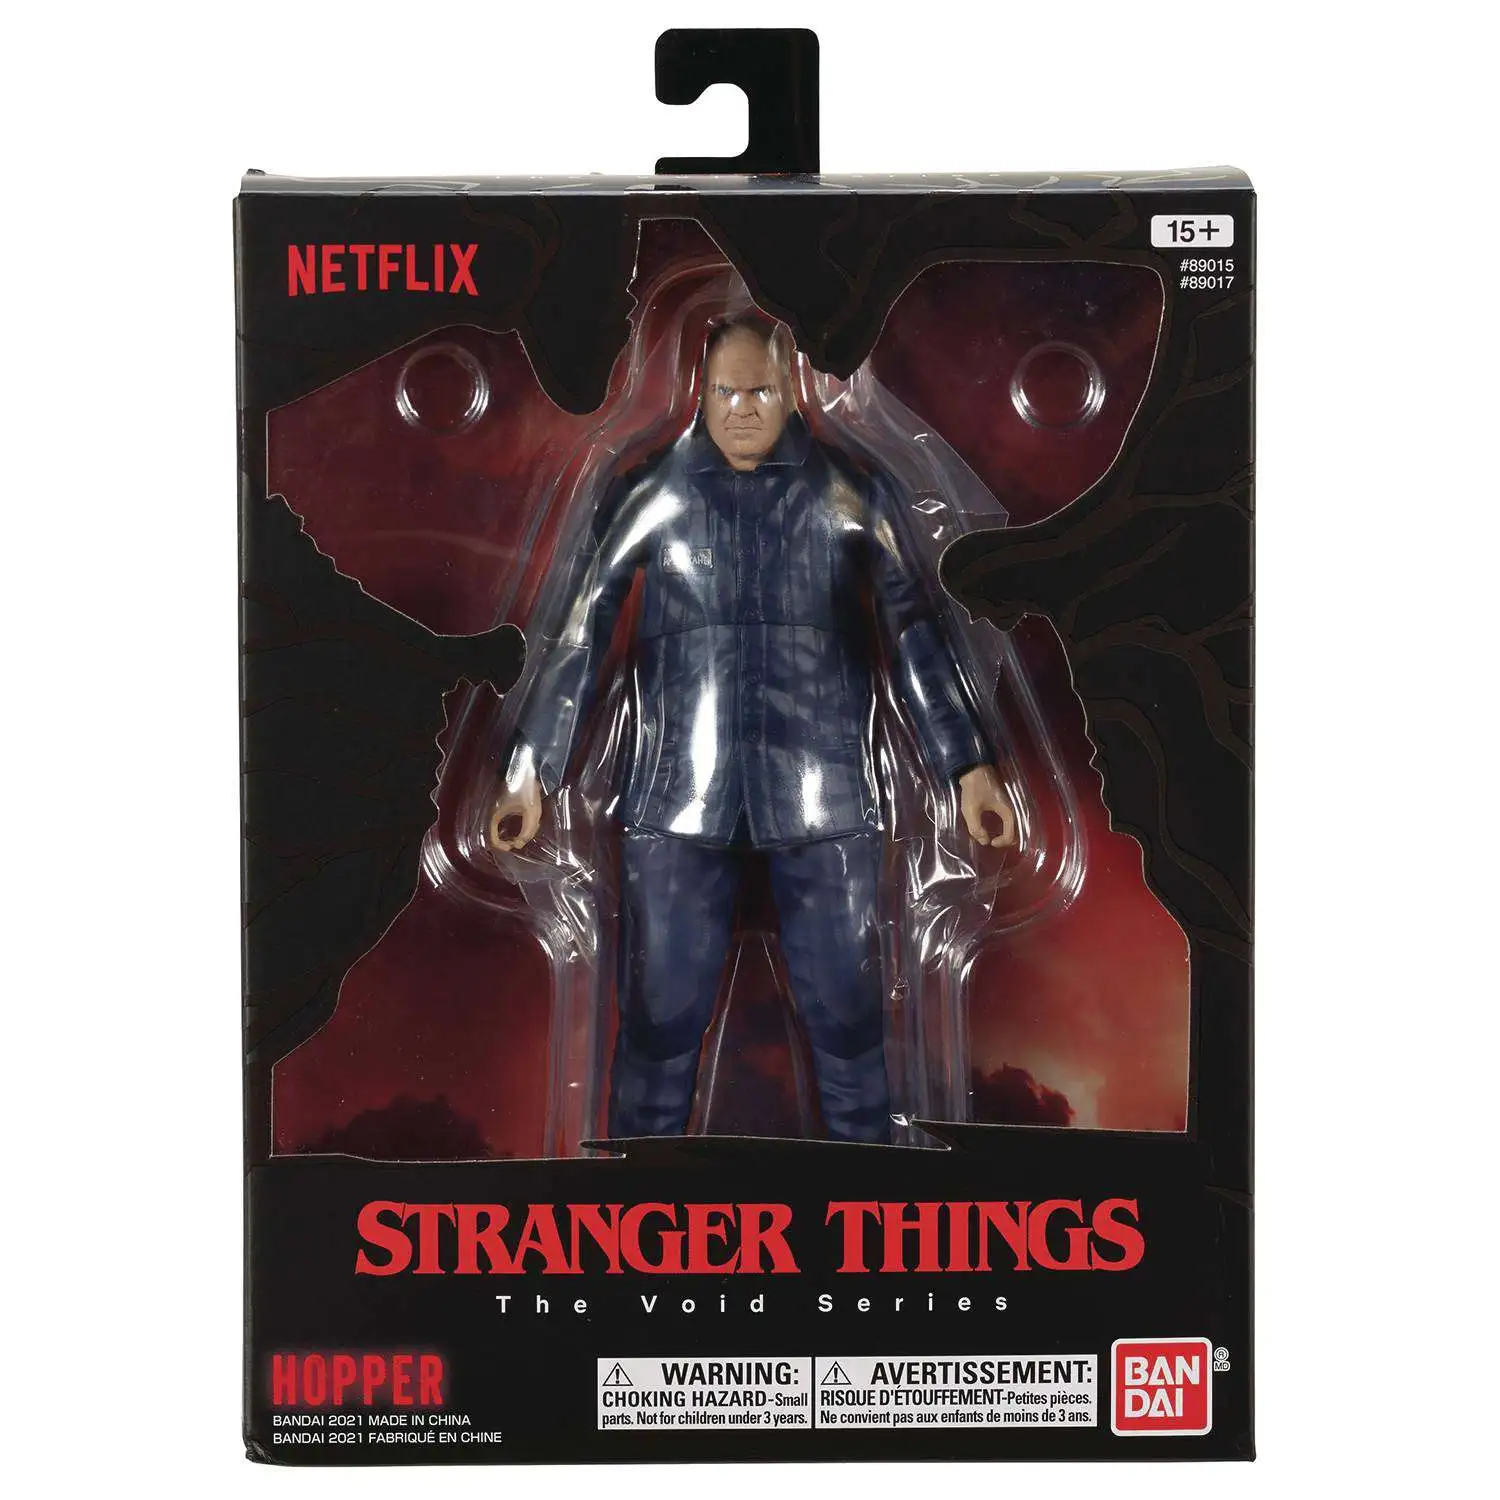 McFarlane Toys Stranger Things Series 3 Will Byers Action Figure